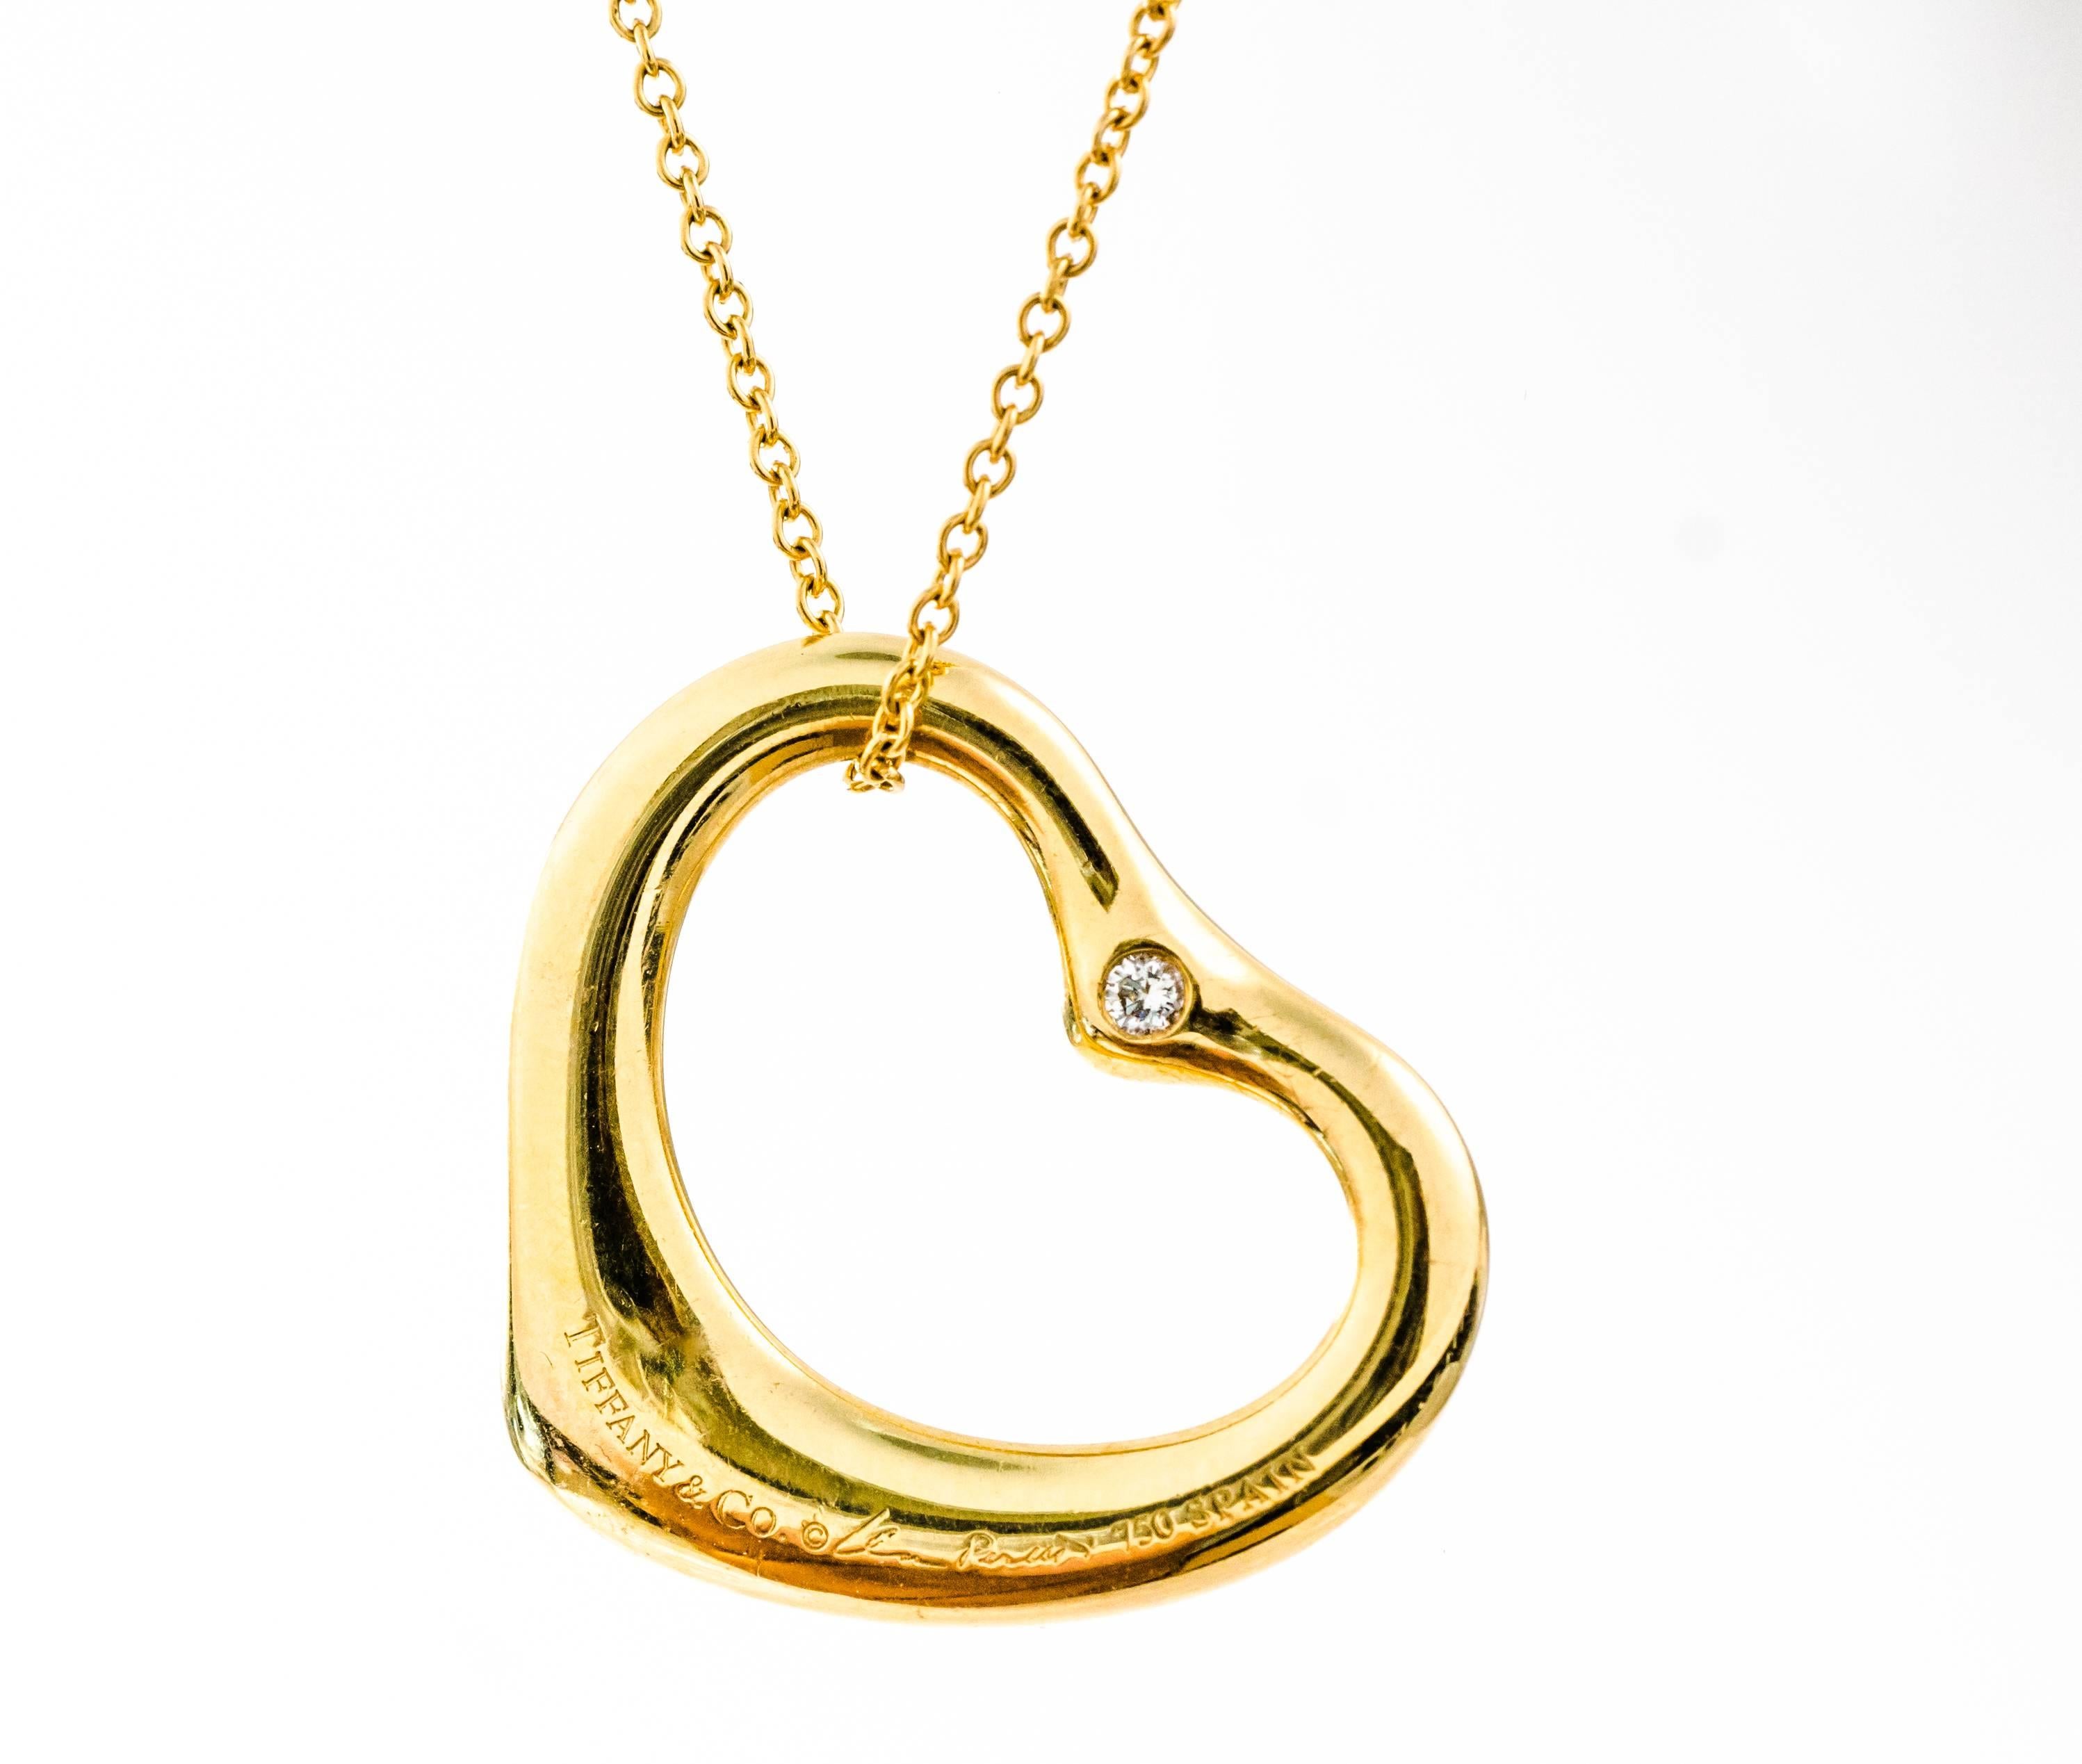 This 1990s Tiffany and Co. Diamond and 18K Yellow Gold necklace is from the Elsa Peretti Open Heart collection. This 15 inch long necklace features 6.7 grams of 18 karat yellow gold.  Two bezel set diamonds adorn the top of the heart pendant, one